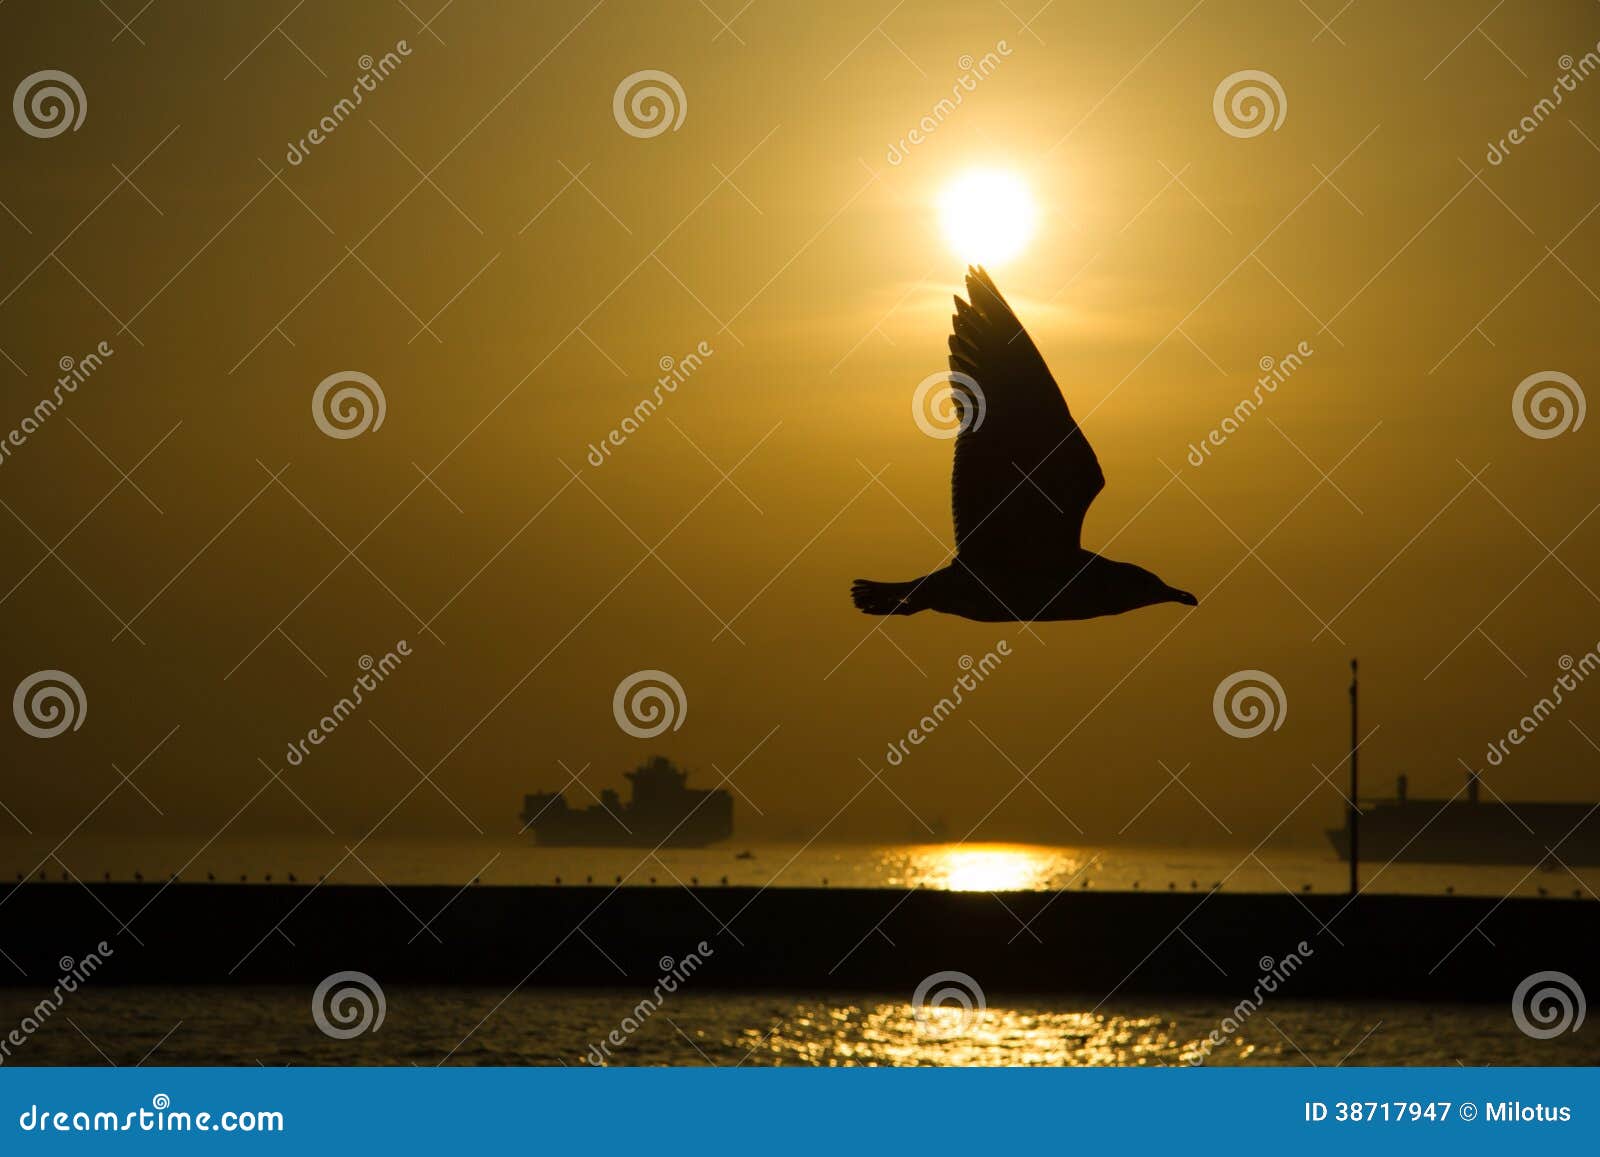 seagull shade in the sunset